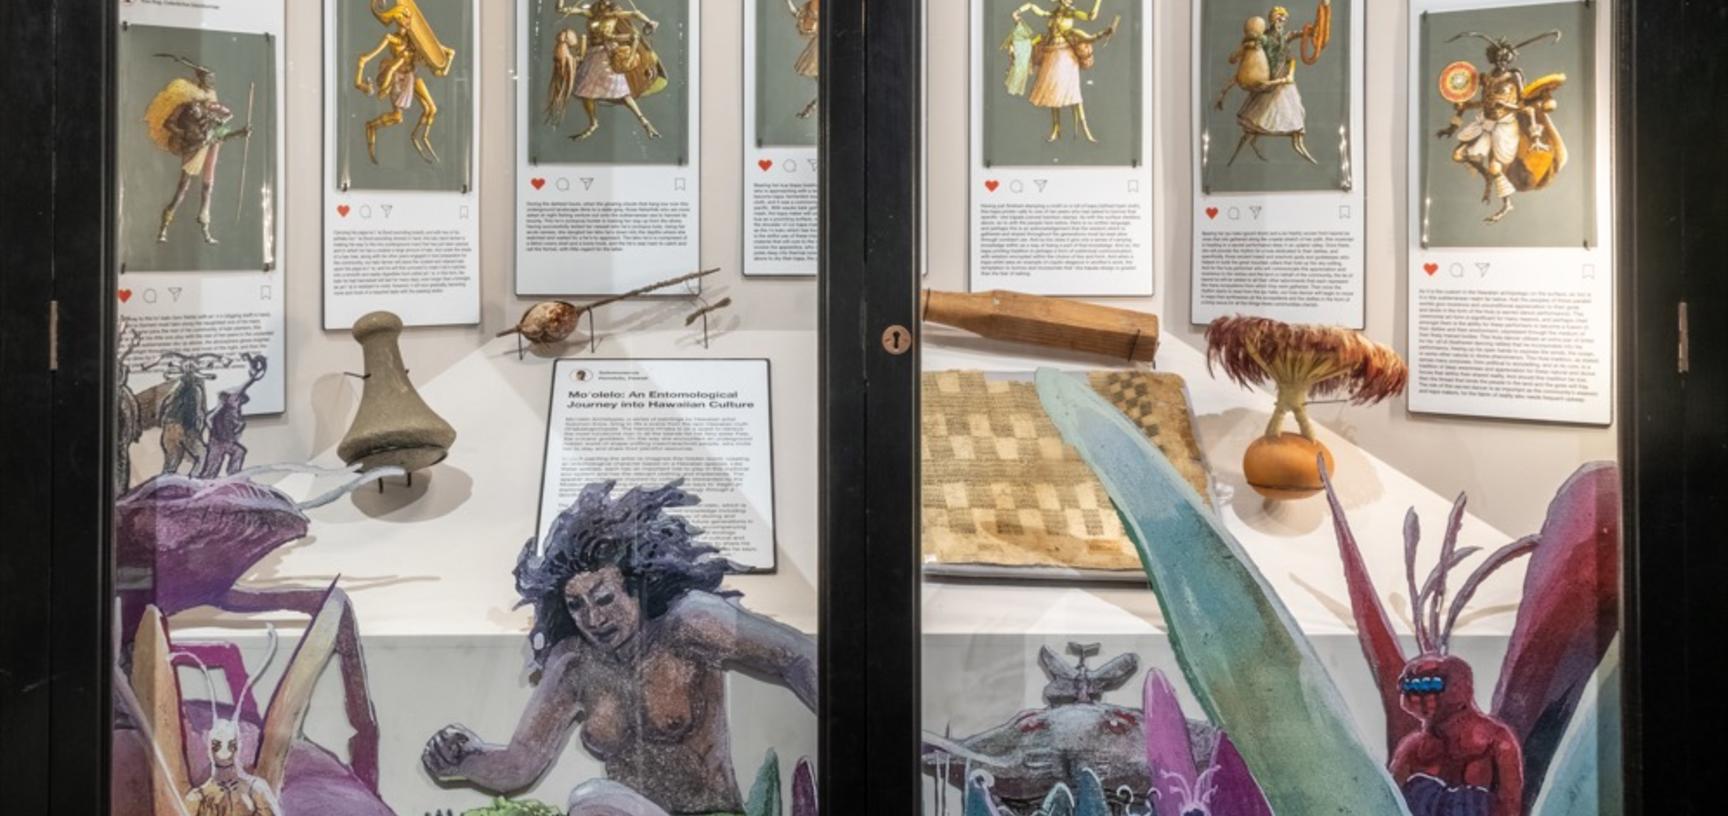 Case display showing seven watercolour illustrations alongside objects featured in the paintings, with colourful cut outs of illustrated figures framing the glass front.